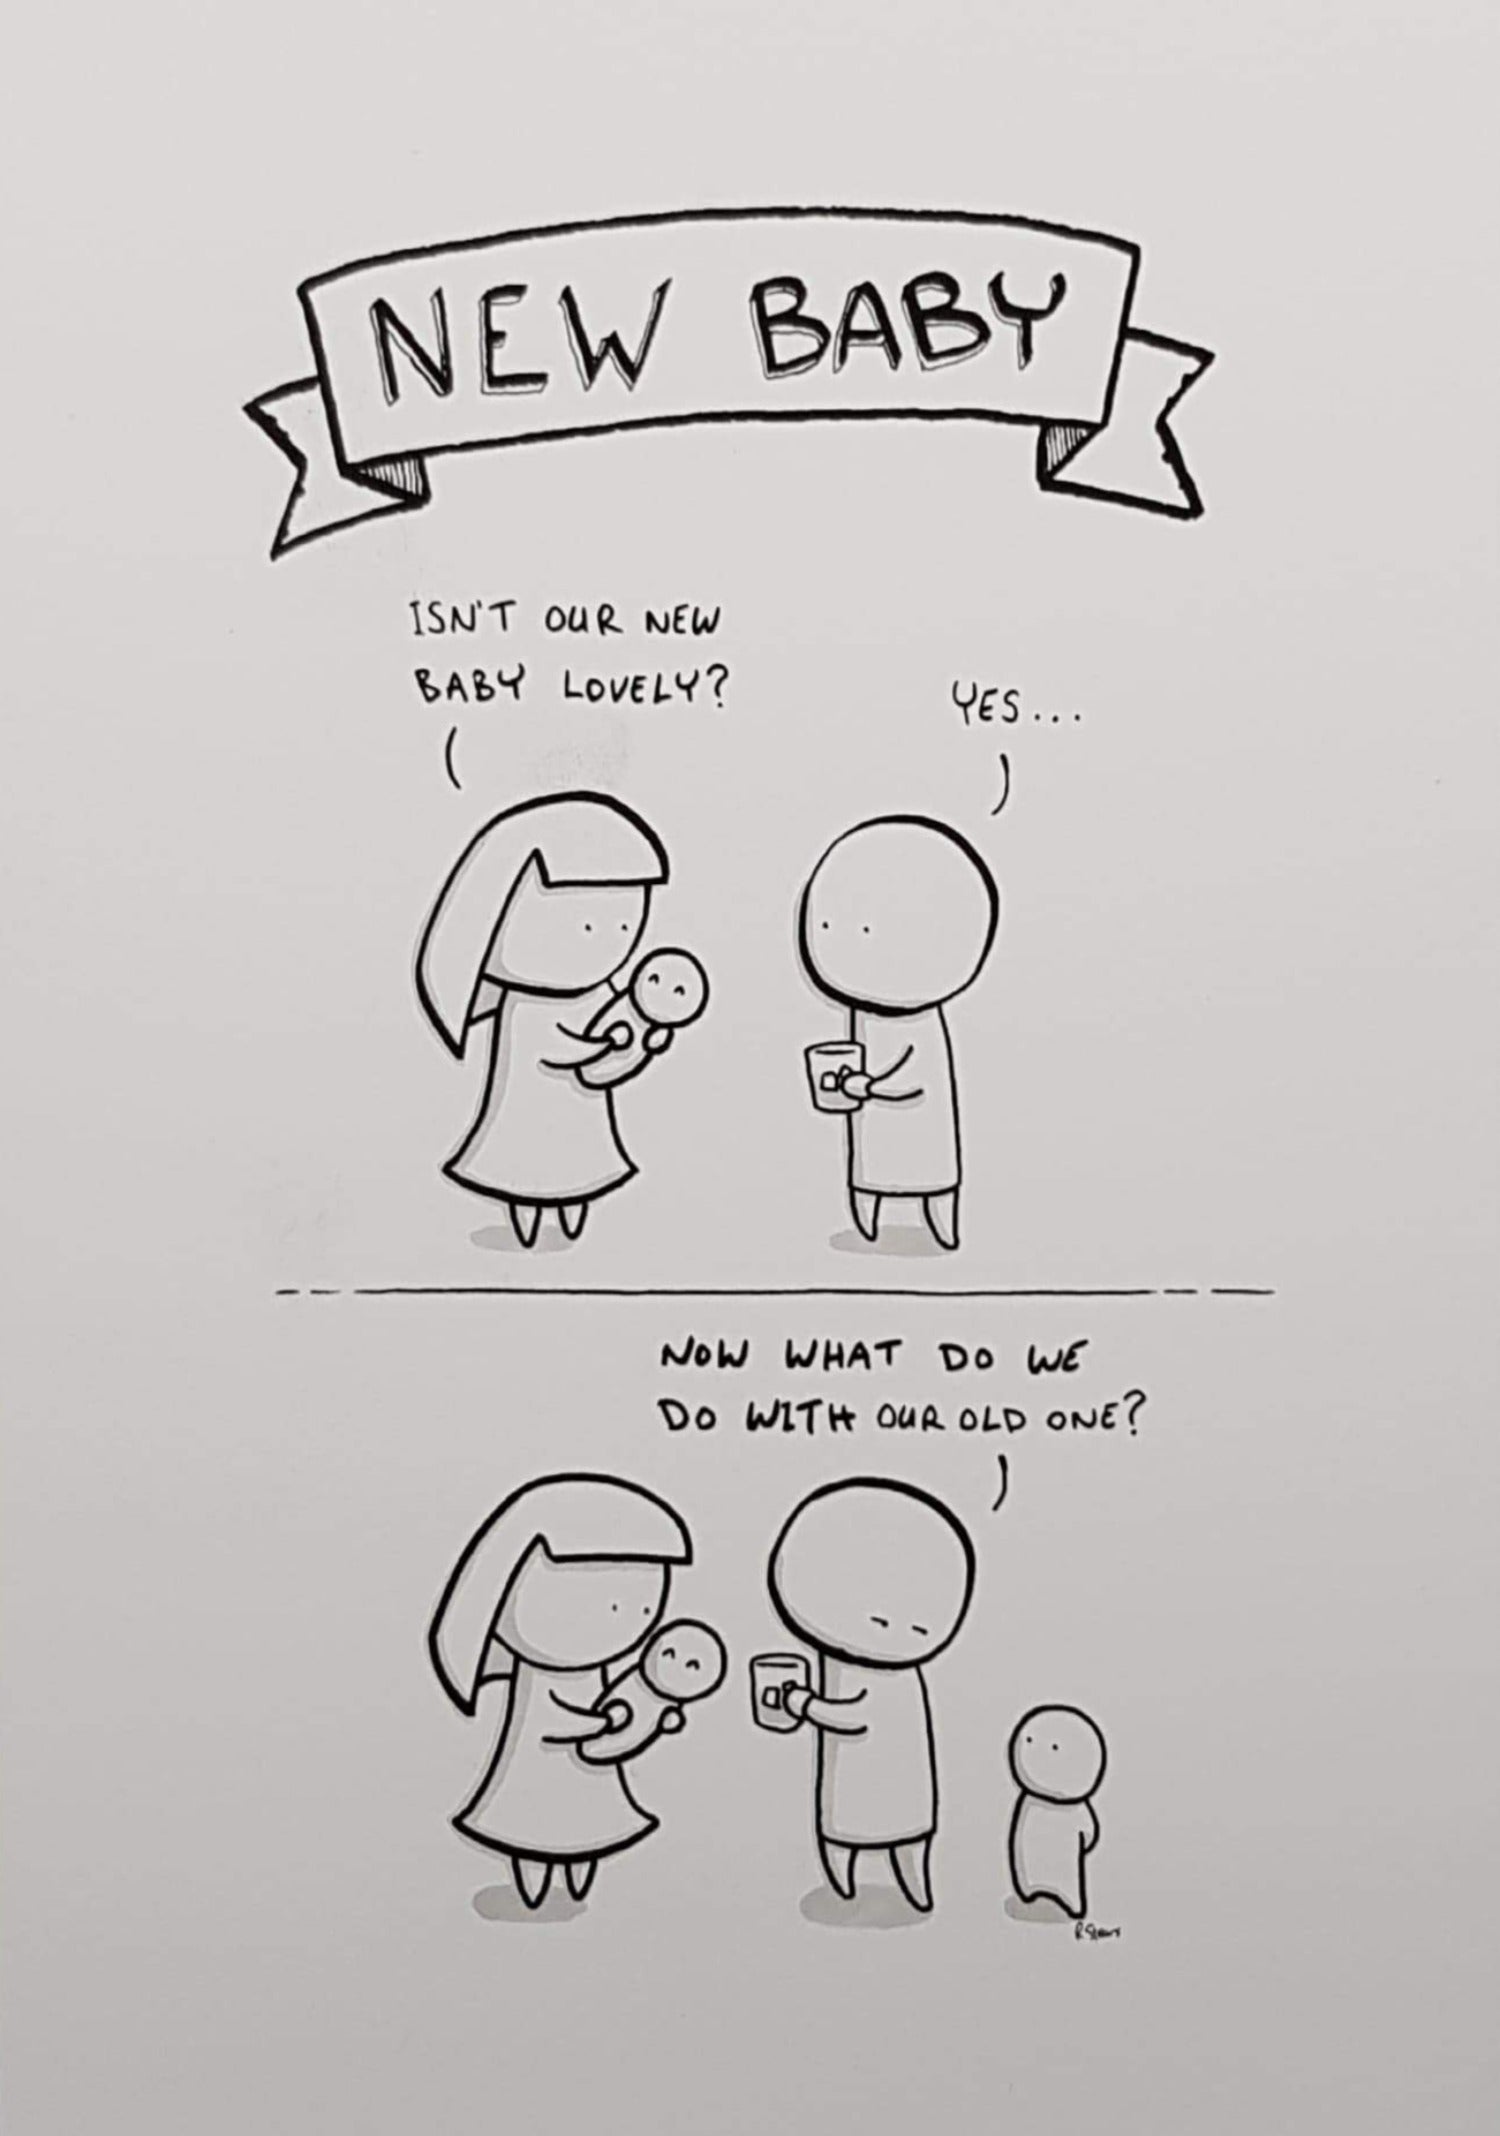 New Baby Card - General / 'Now What Do We Do' (Humour)